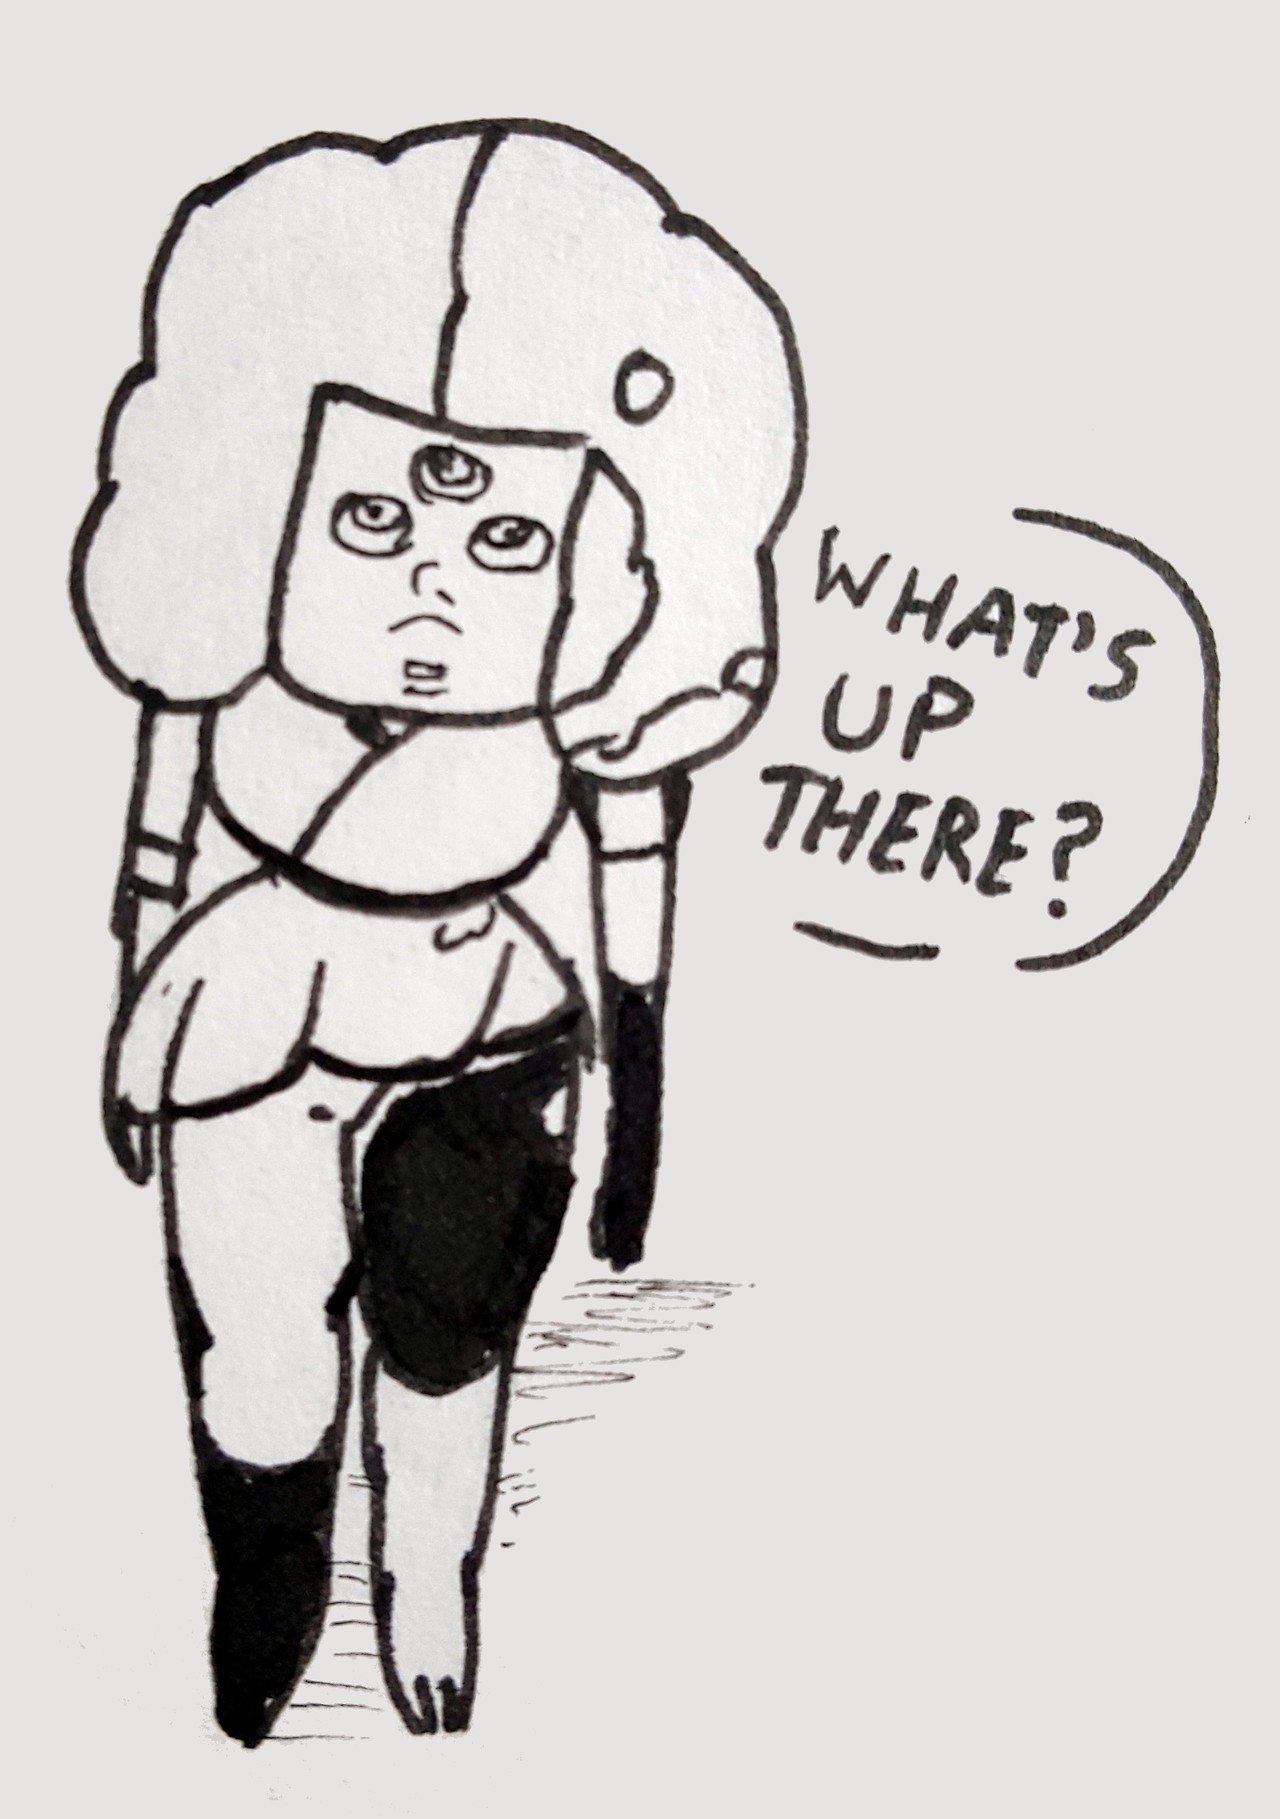 Baby Garnet Sketch DumpI have a fan comic planned that takes place shortly after Garnet is first formed, but I wasn’t very familiar with that form (especially drawing her without the visor!) and...